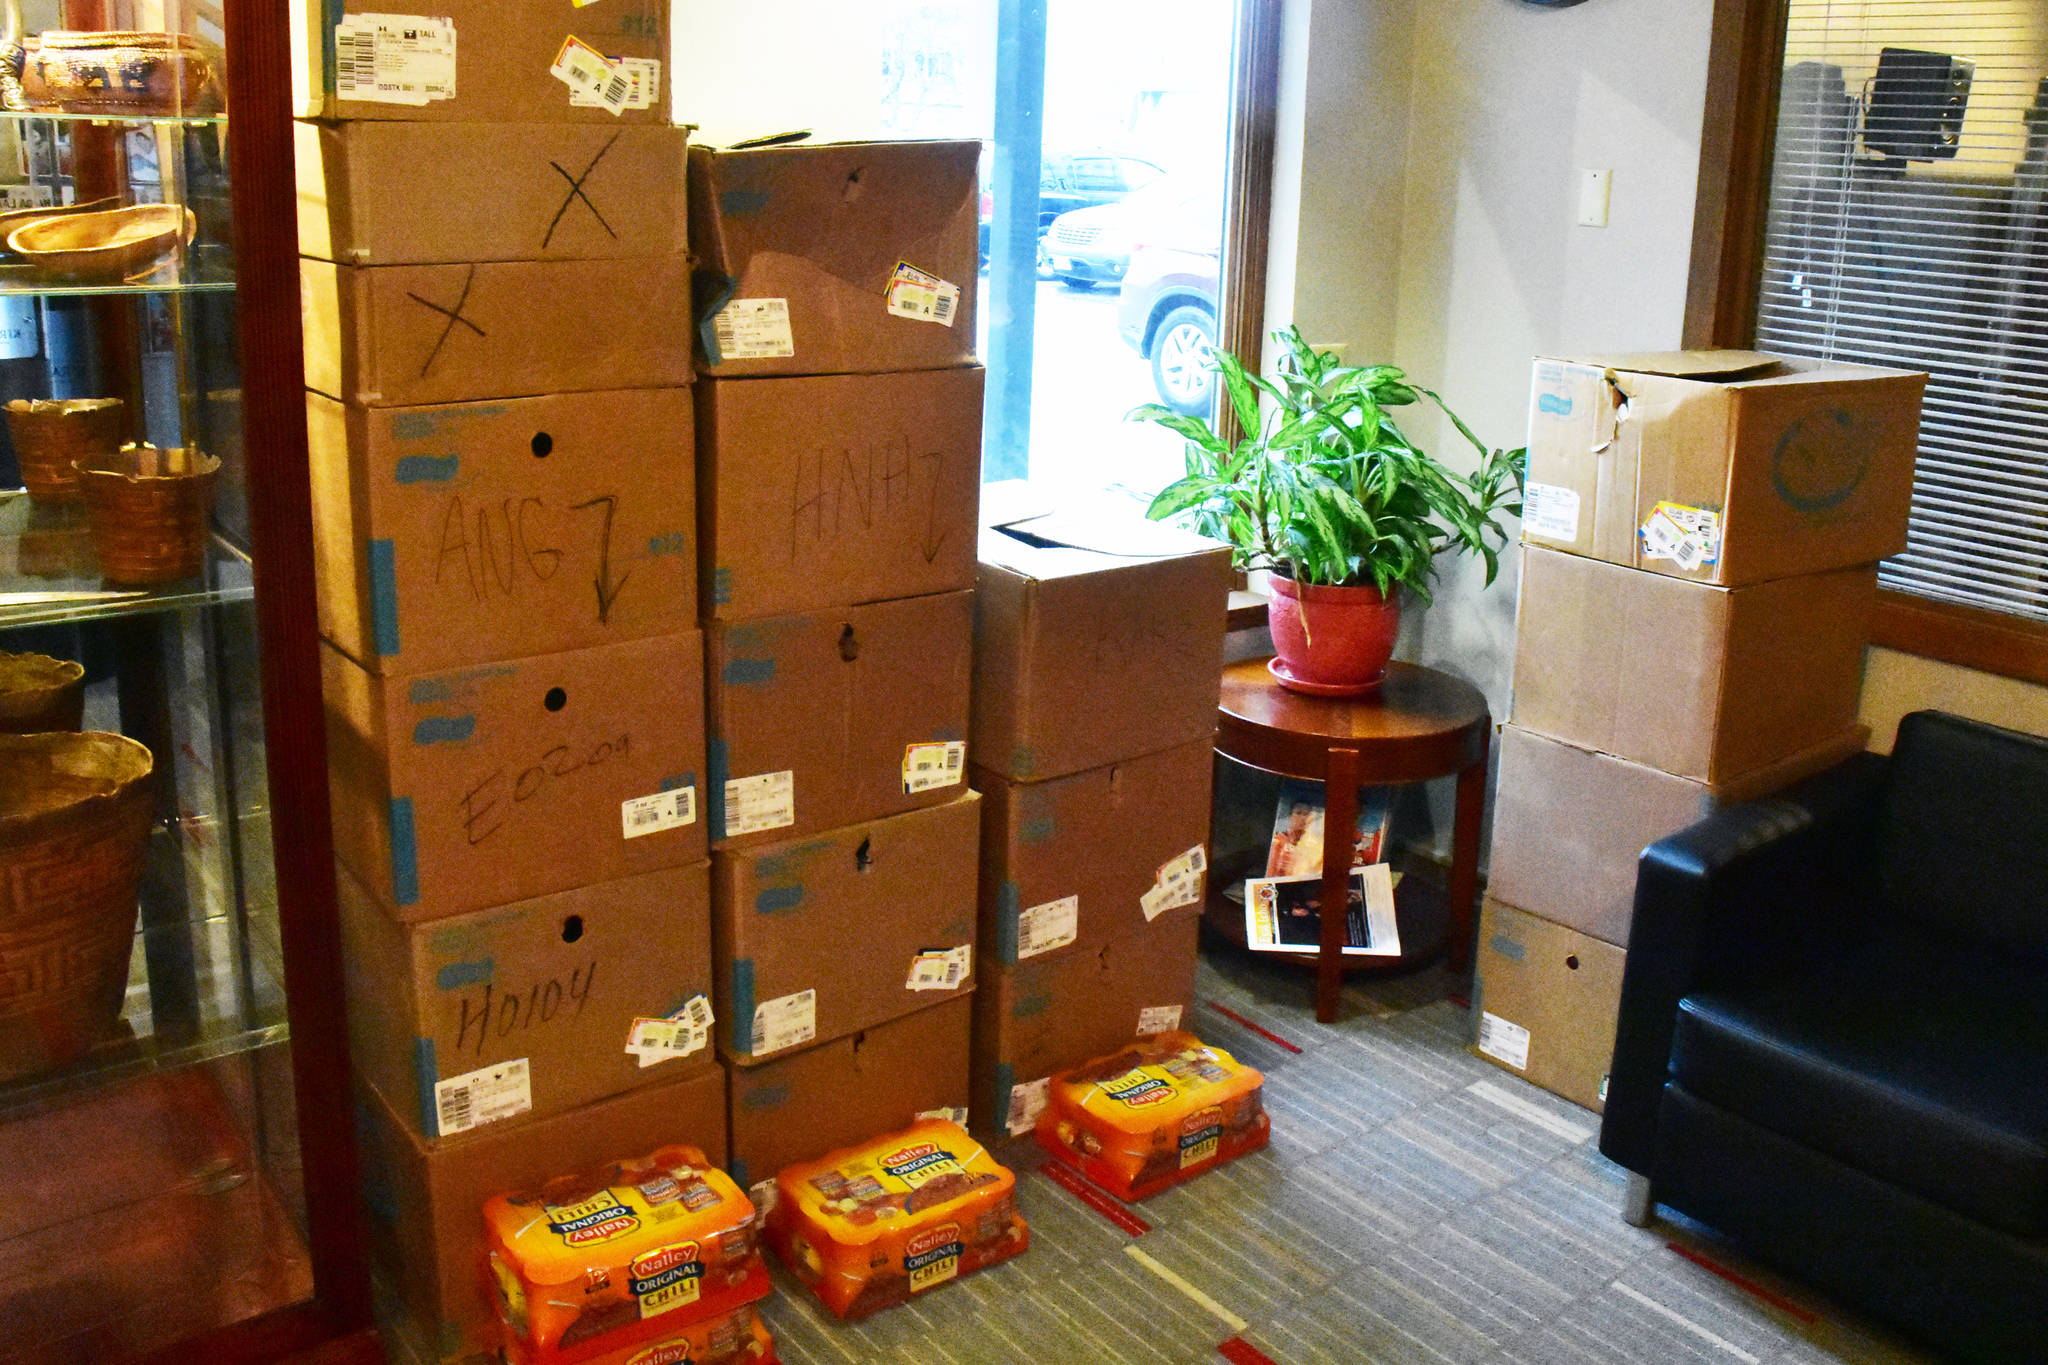 Donated food in the offices of Central Council of Tlingit and Haida Indian Tribes of Alaska on Thursday, Feb. 27, 2020. (Peter Segall | Juneau Empire)